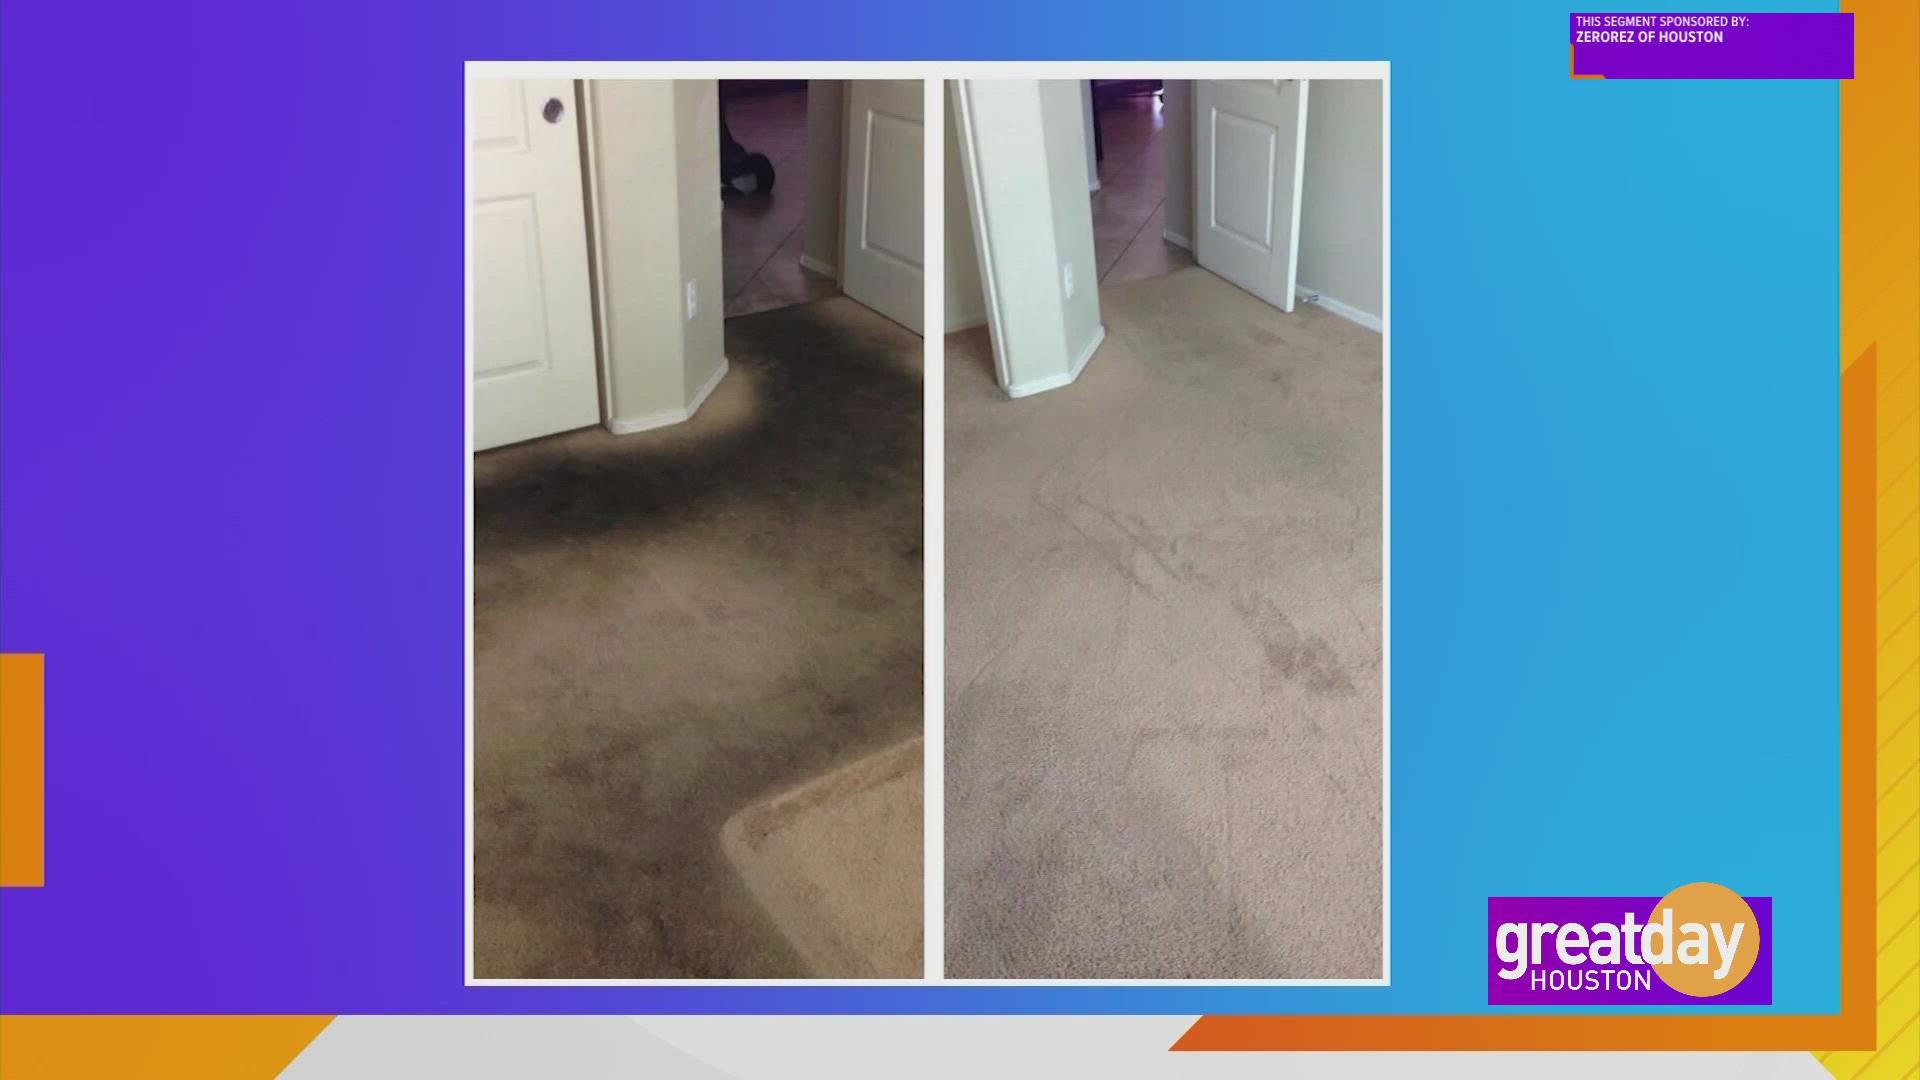 Your carpets and floors will look and feel cleaner, longer.